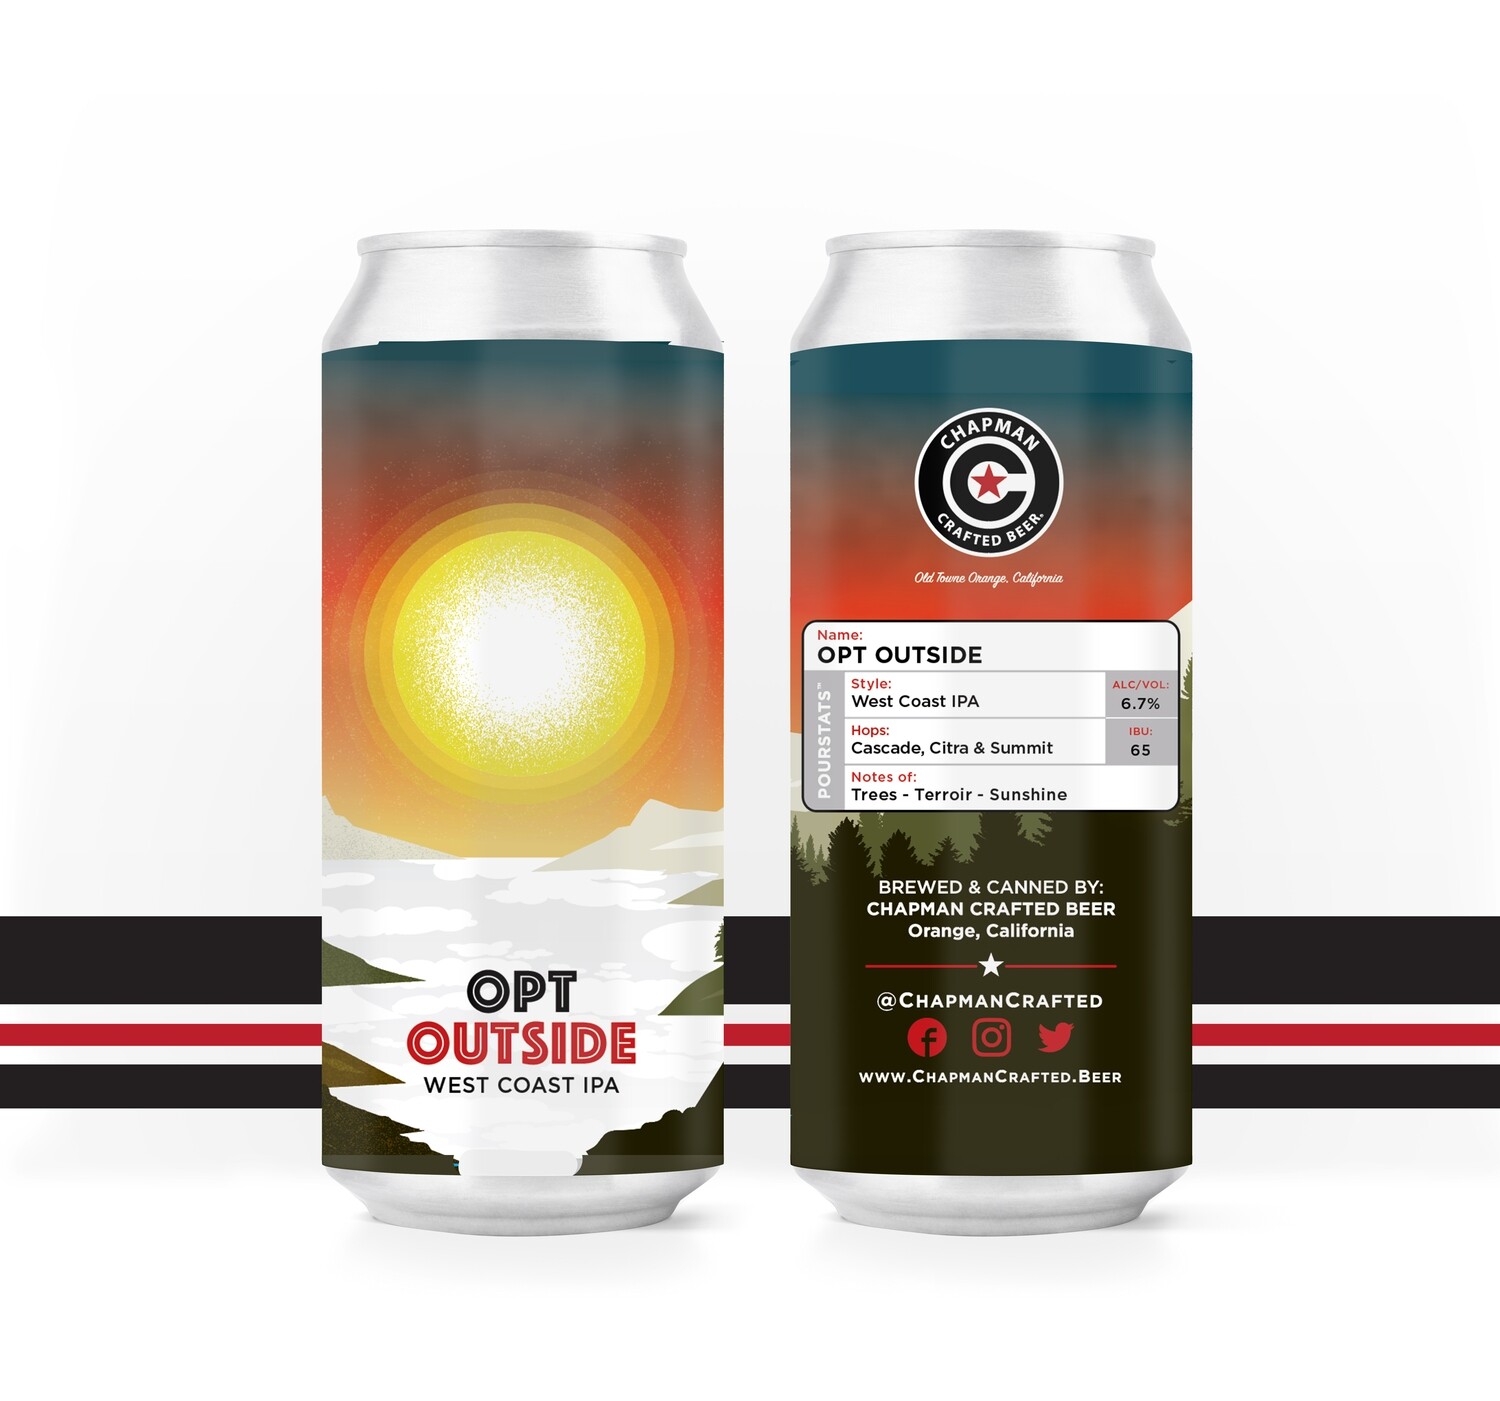 Opt Outside Full Case (24x16oz. cans)